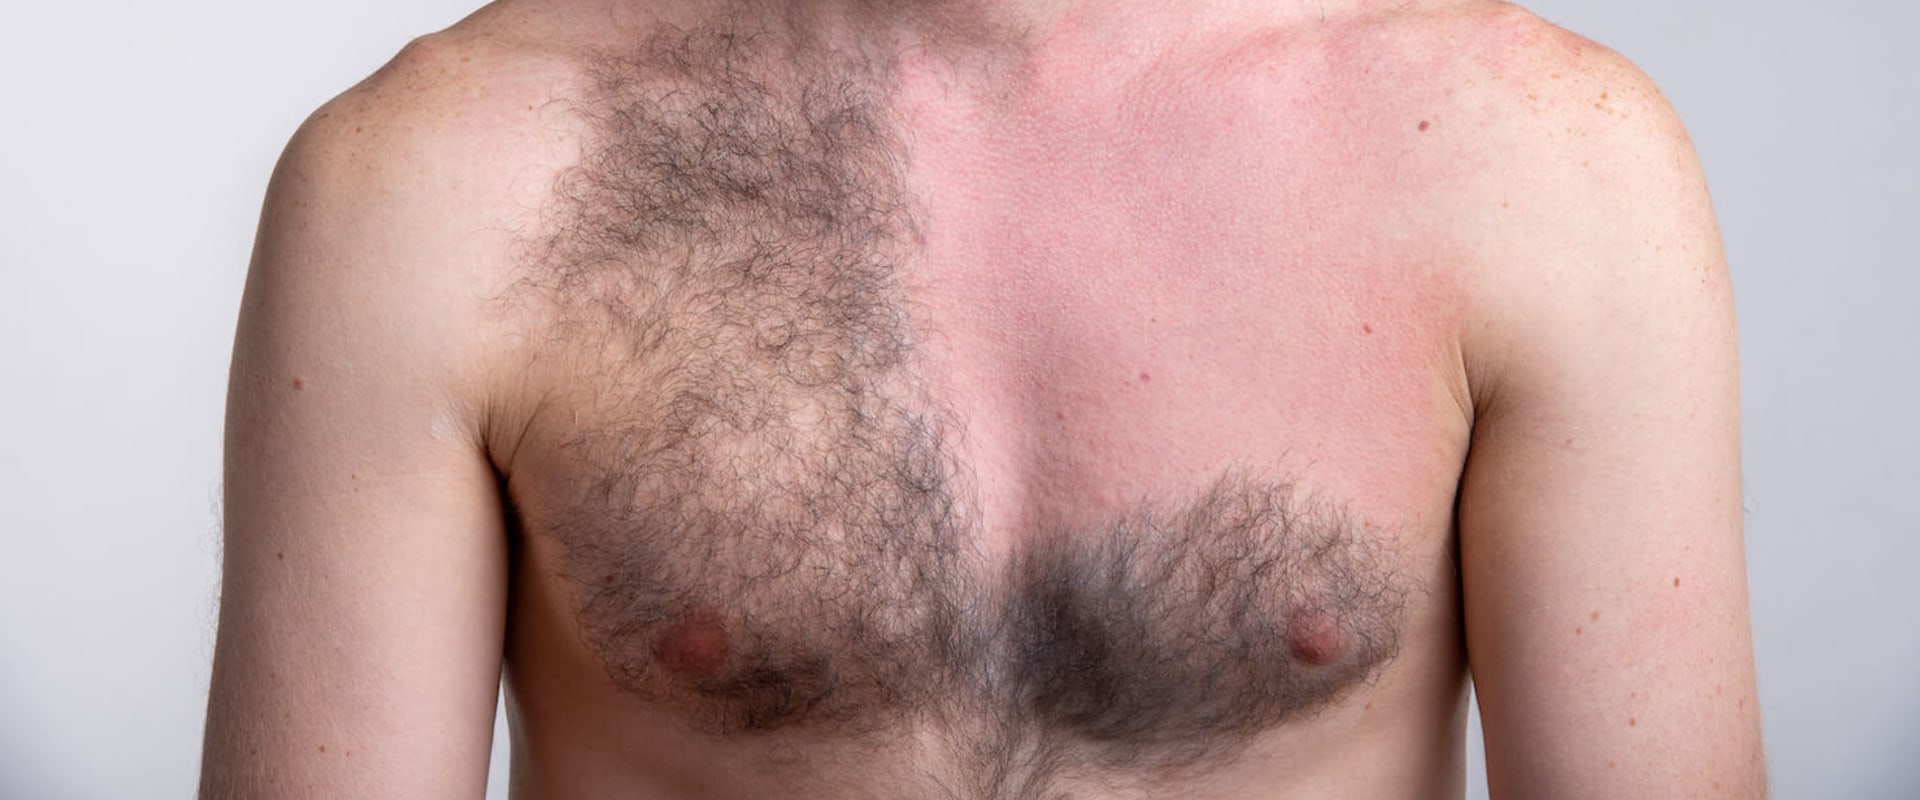 Understanding the Changes in Pigmentation After Laser Hair Removal